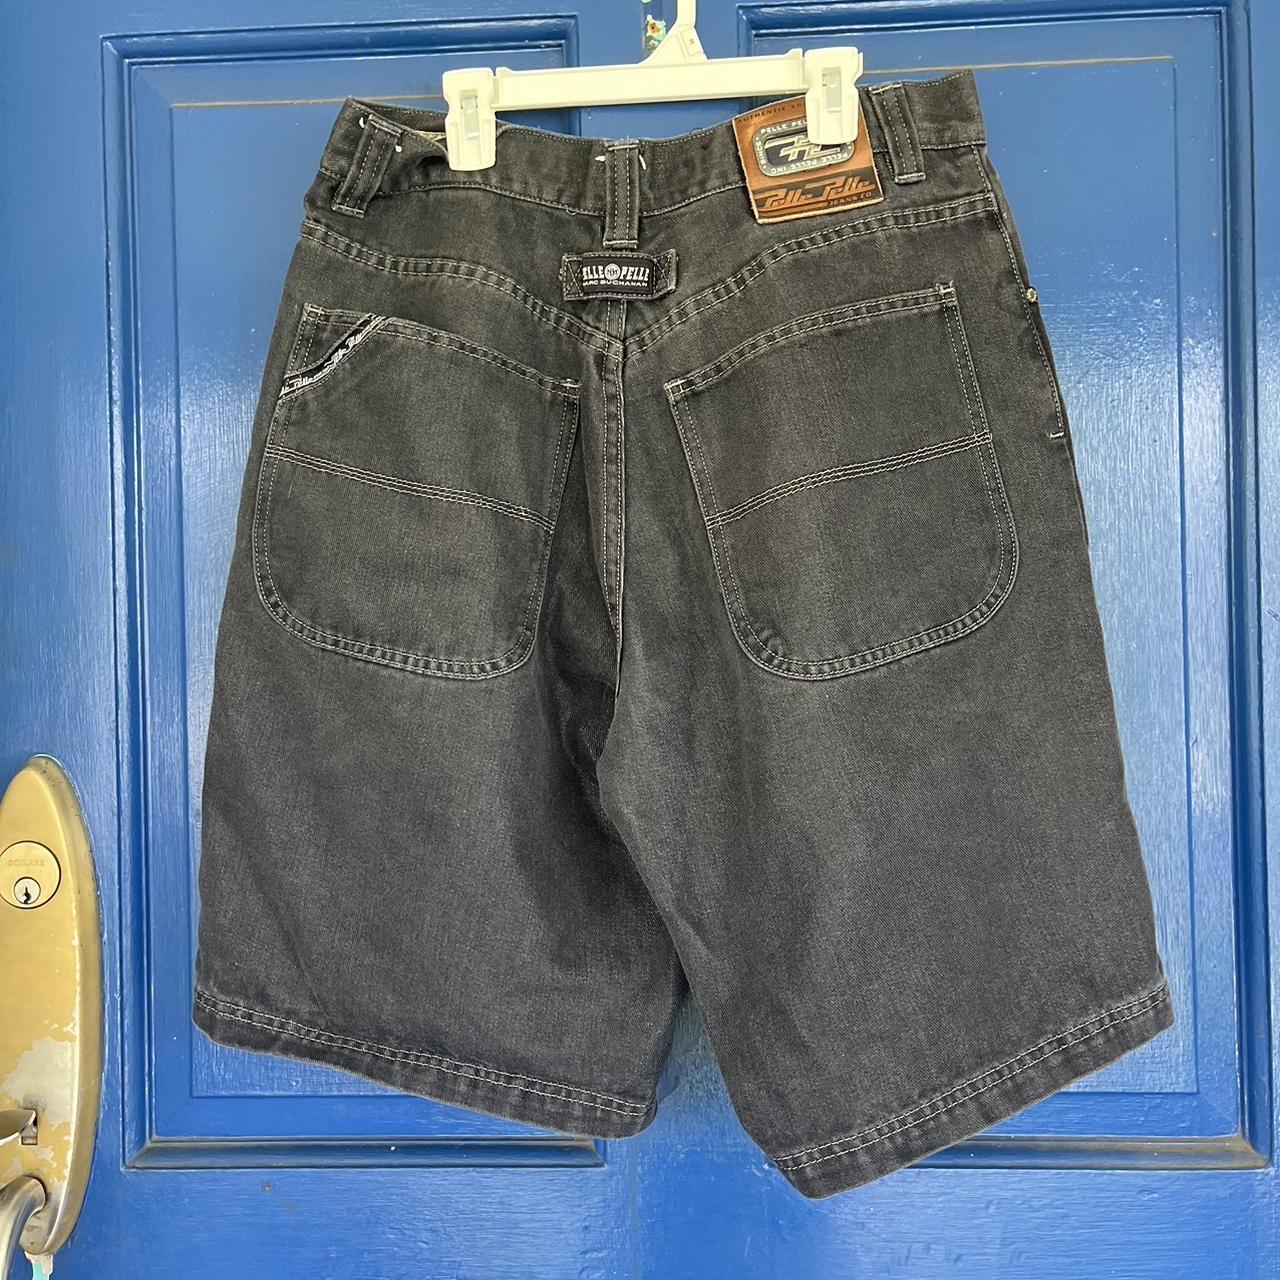 Pelle Pelle jorts. Great quality and condition. Size... - Depop